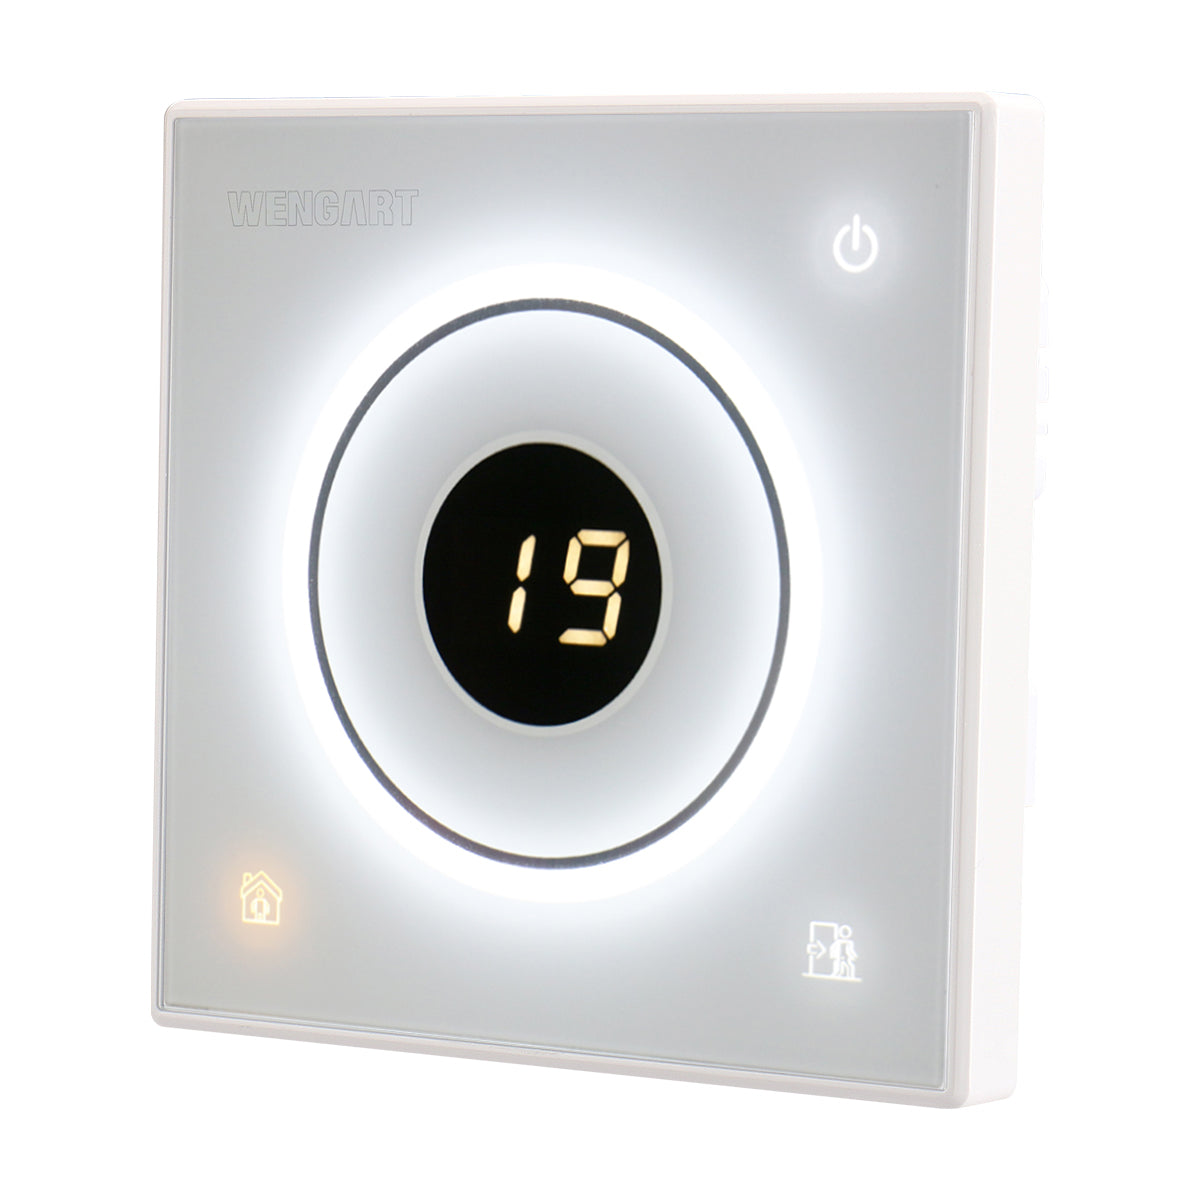 Room Thermostat, 16A